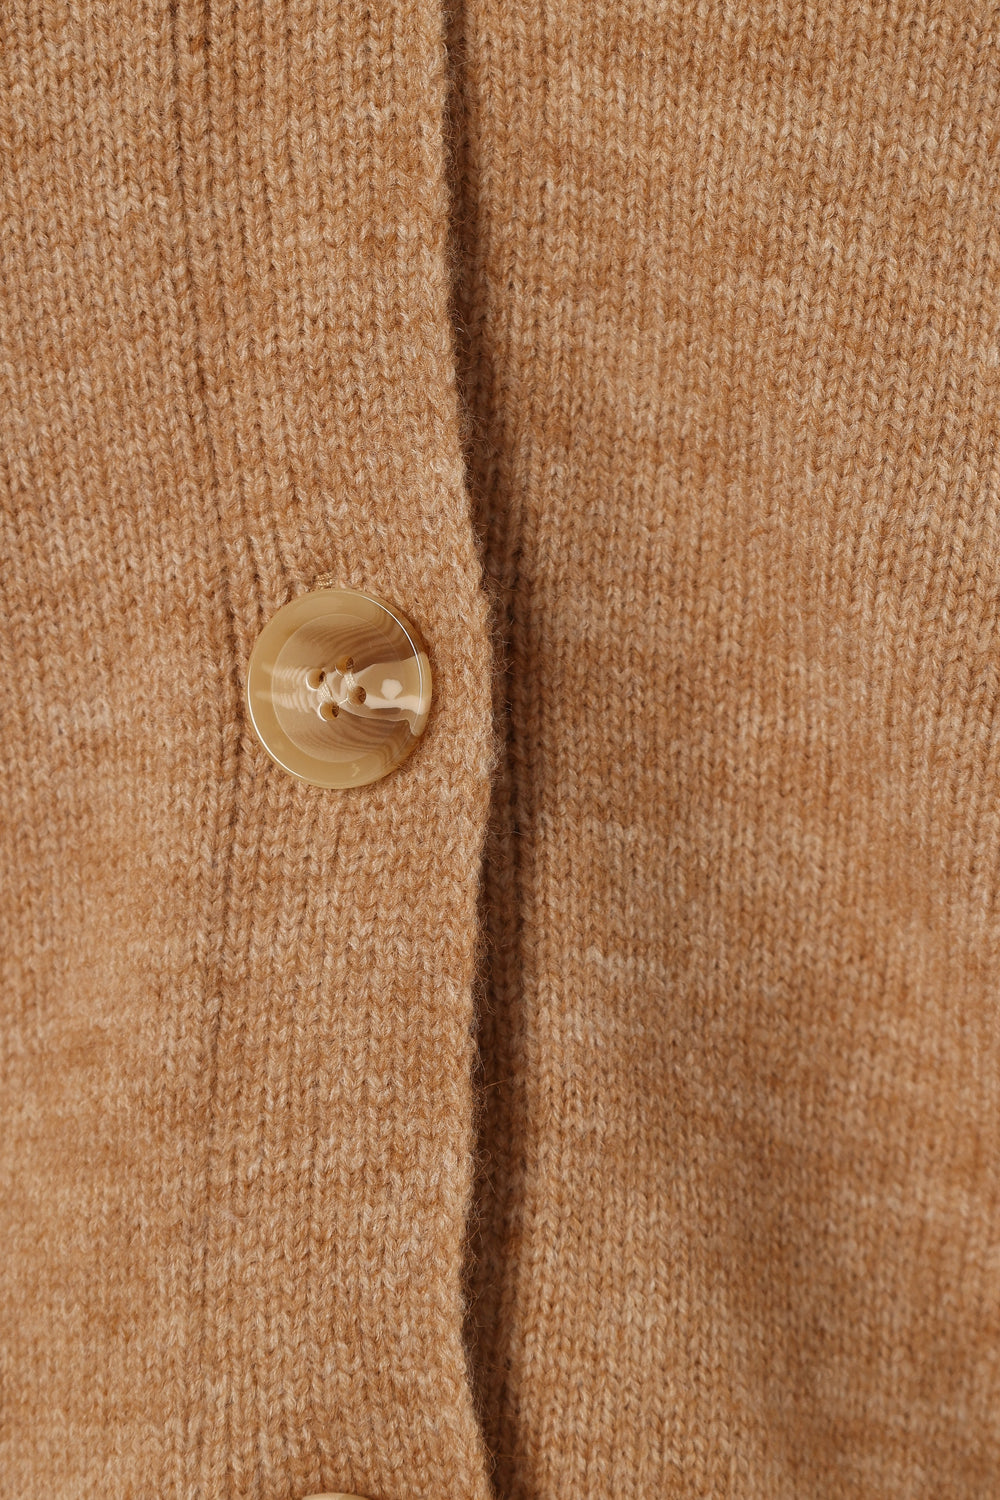 KNITWEAR @Isabel Button Front Cardigan - Beige (Hold for Cool Beginnings)